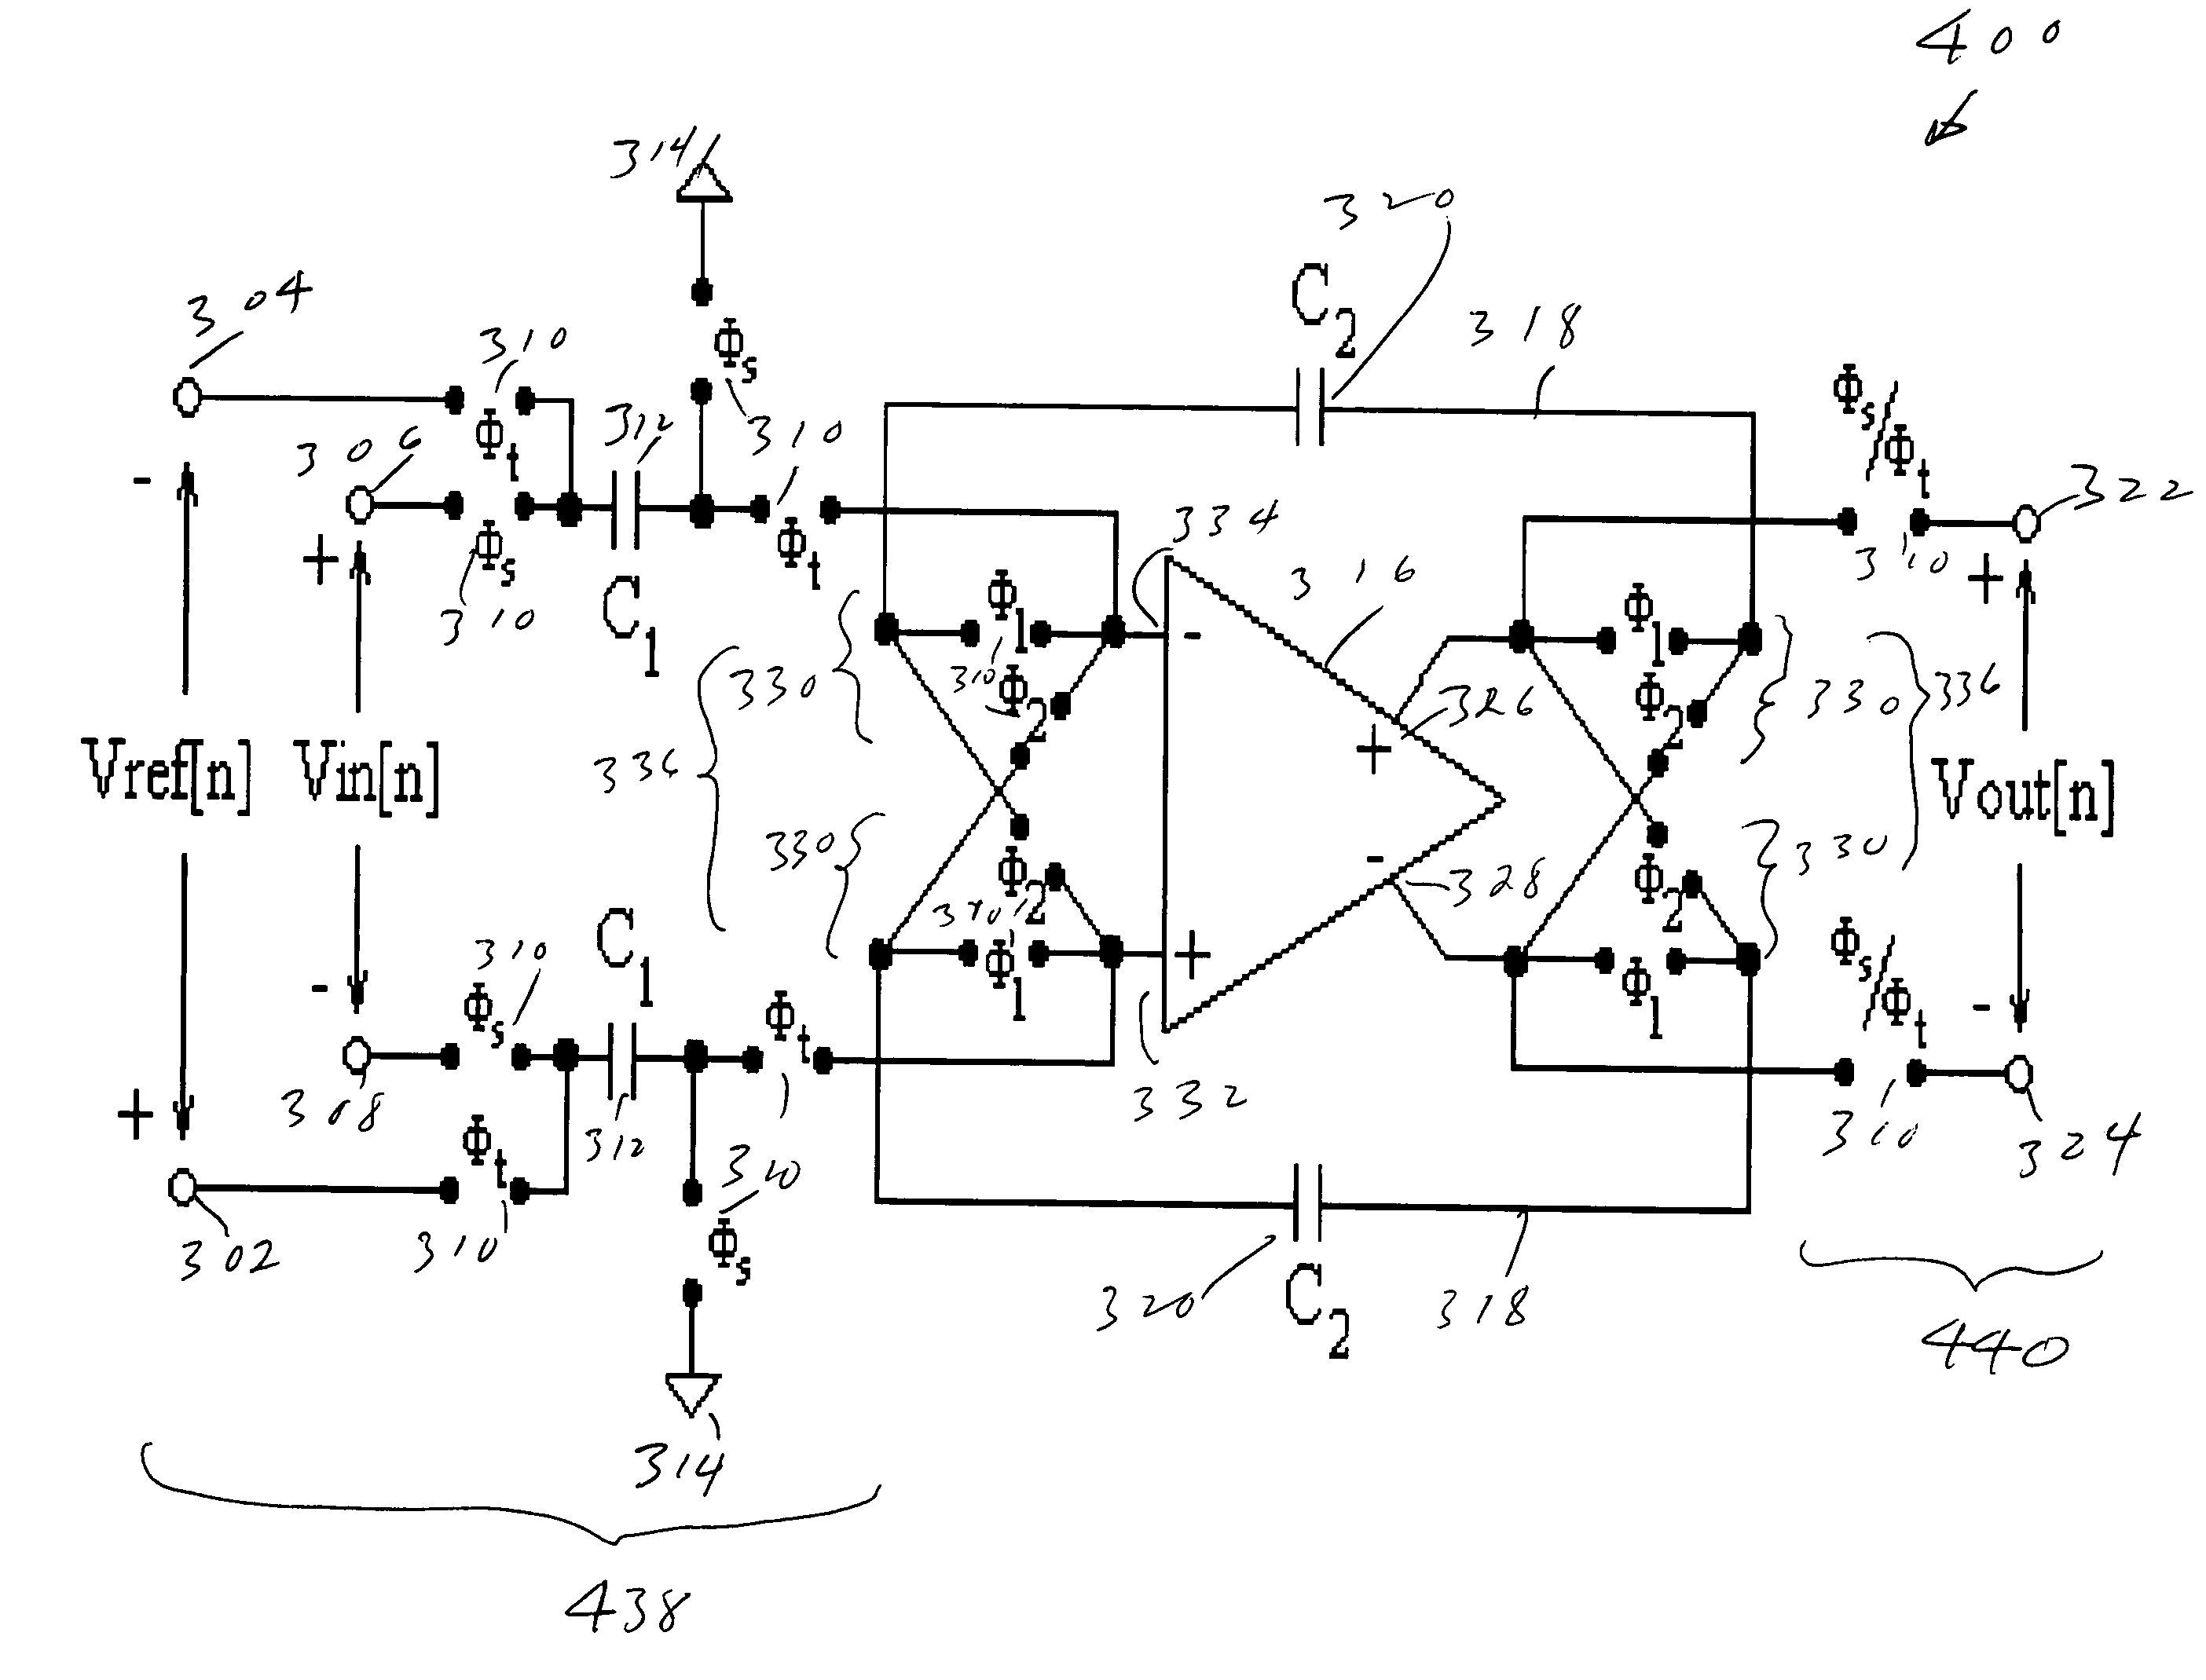 Switched-capacitor high-pass mirrored integrator